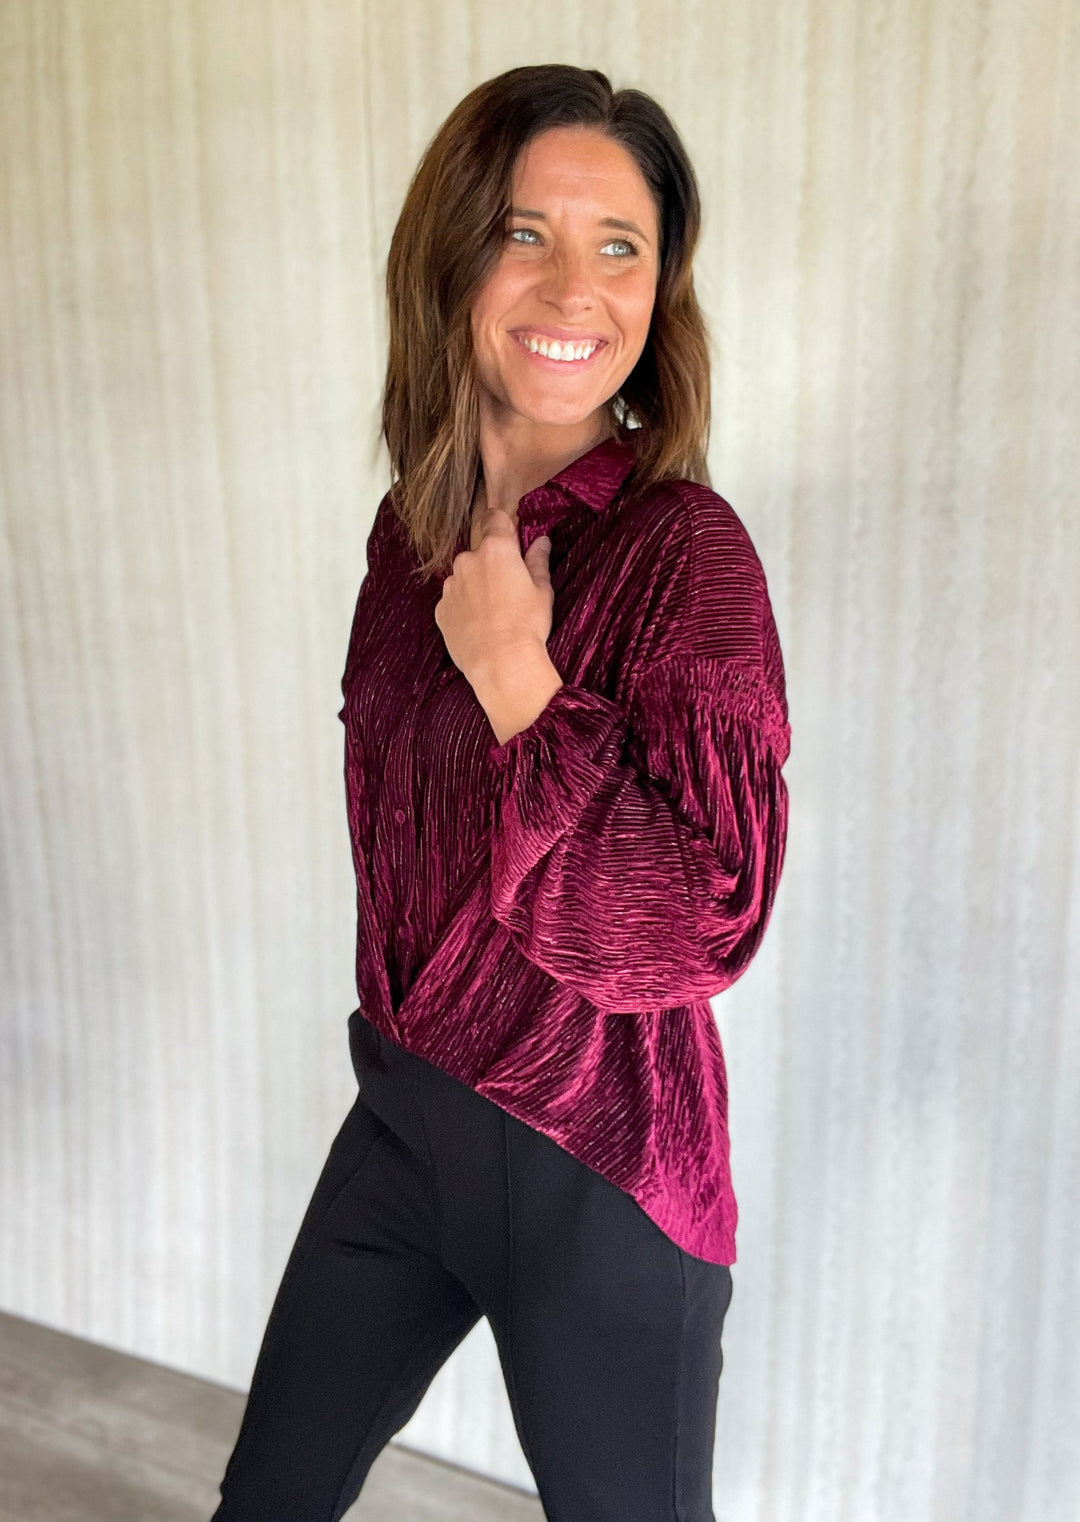 Holiday blouses - Burgundy Velvet Button Down Shirt (Office Holiday Party Outfit)